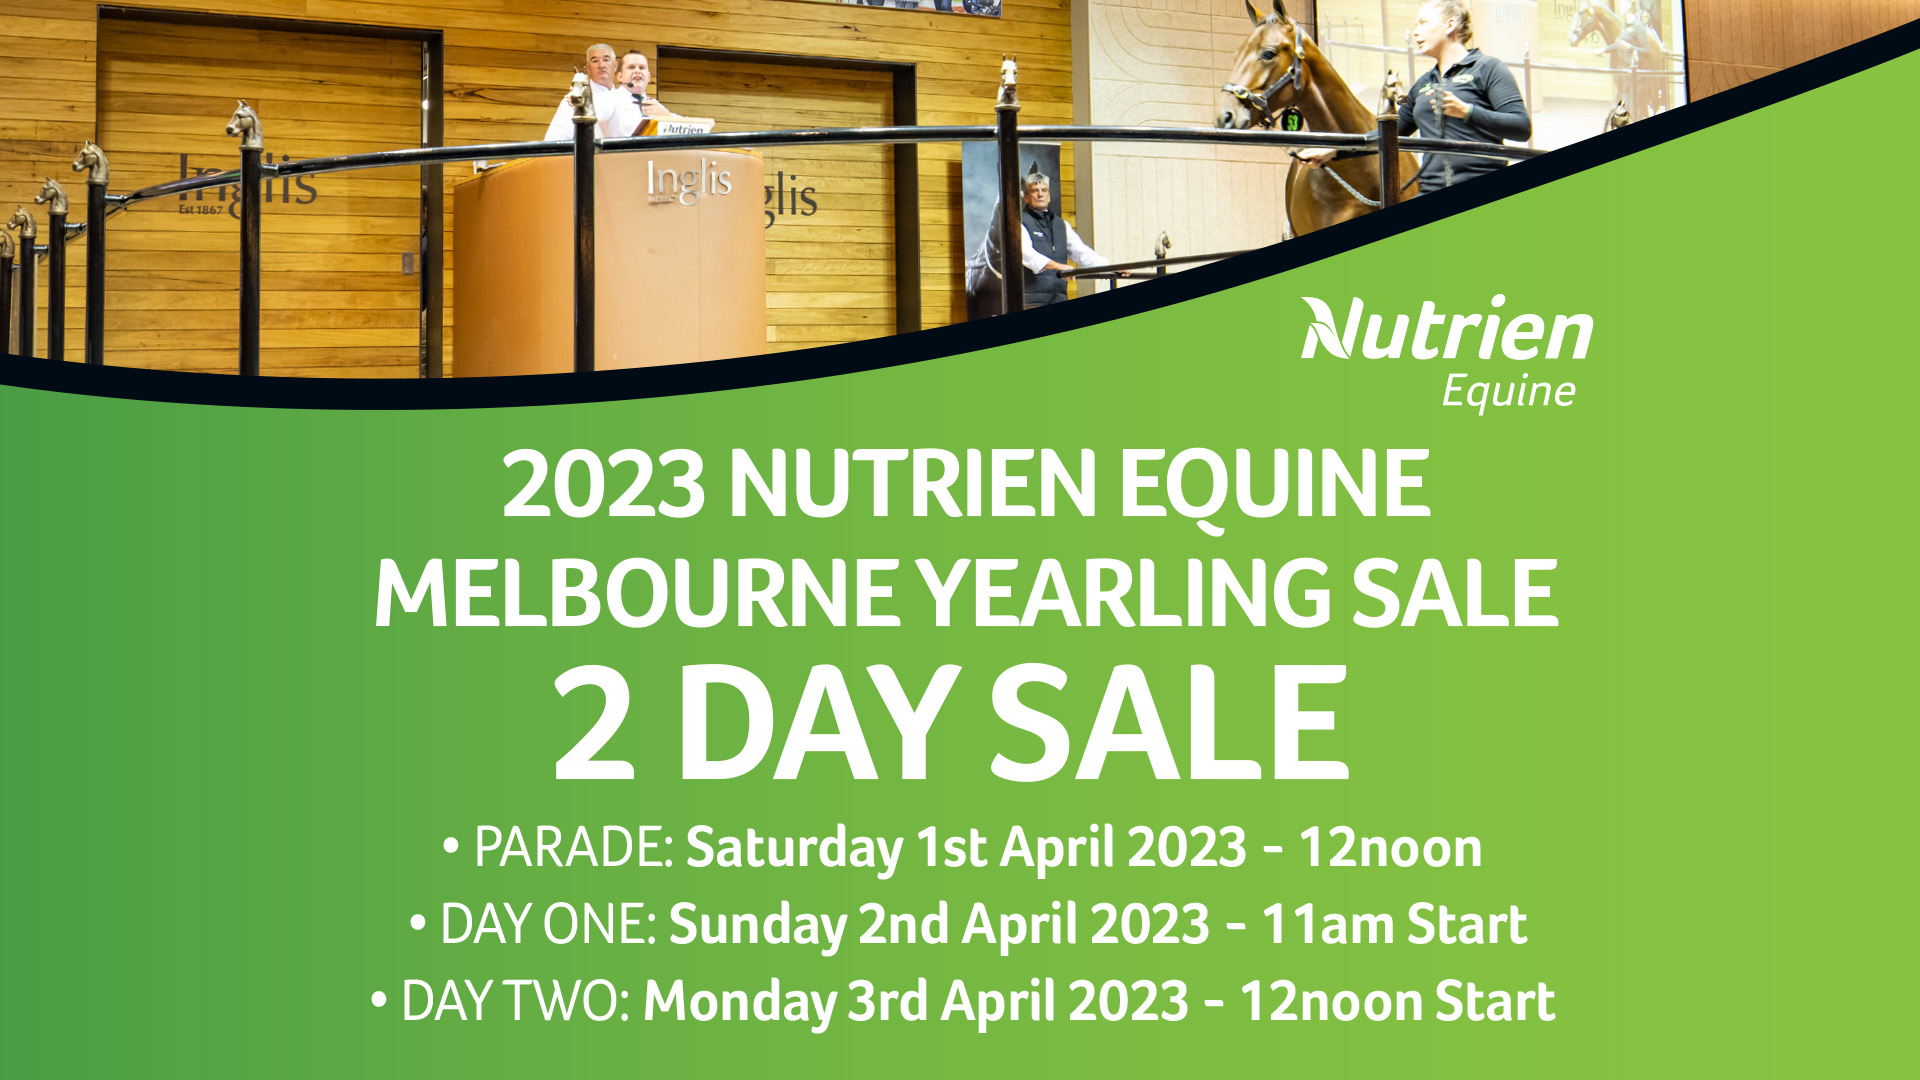 2 DAY SALE – 2023 Nutrien Equine Melbourne Yearling Sale